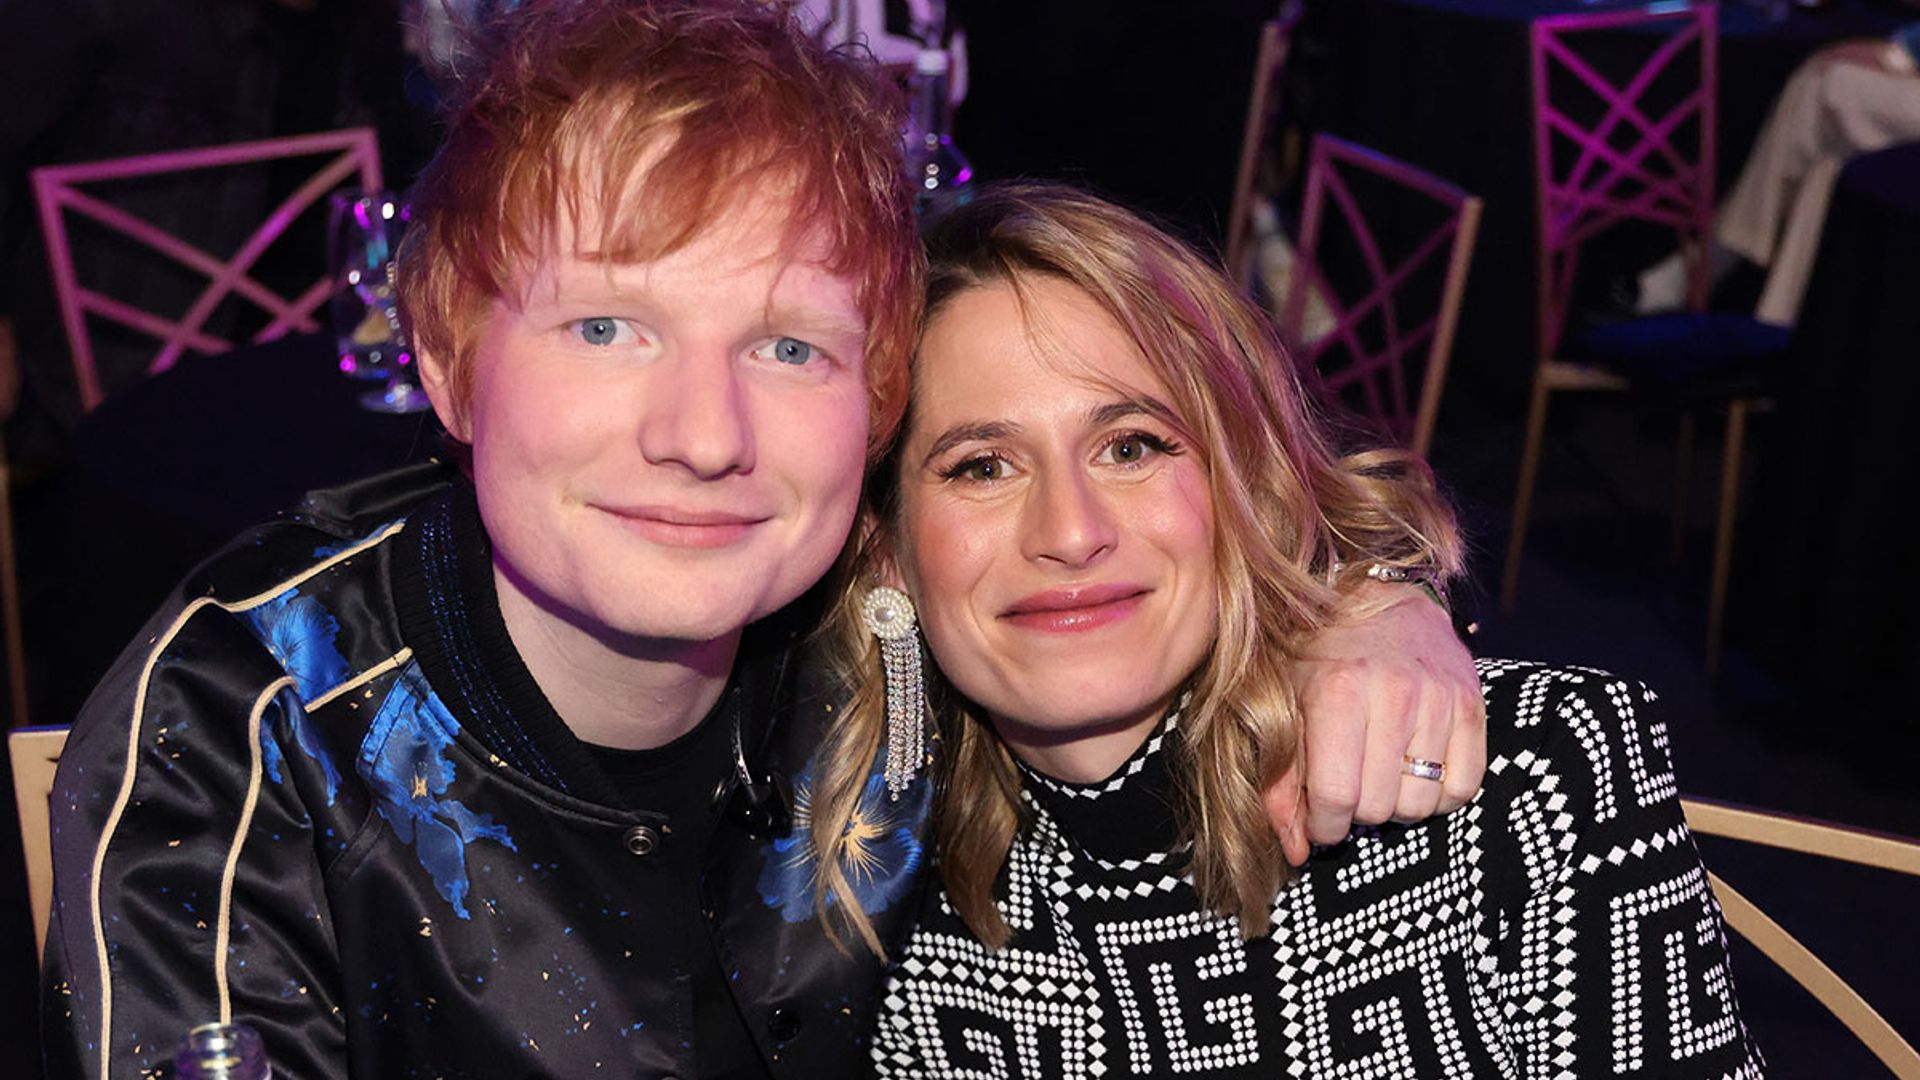 Ed Sheeran stuns fans with intimate photo with wife Cherry Seaborn